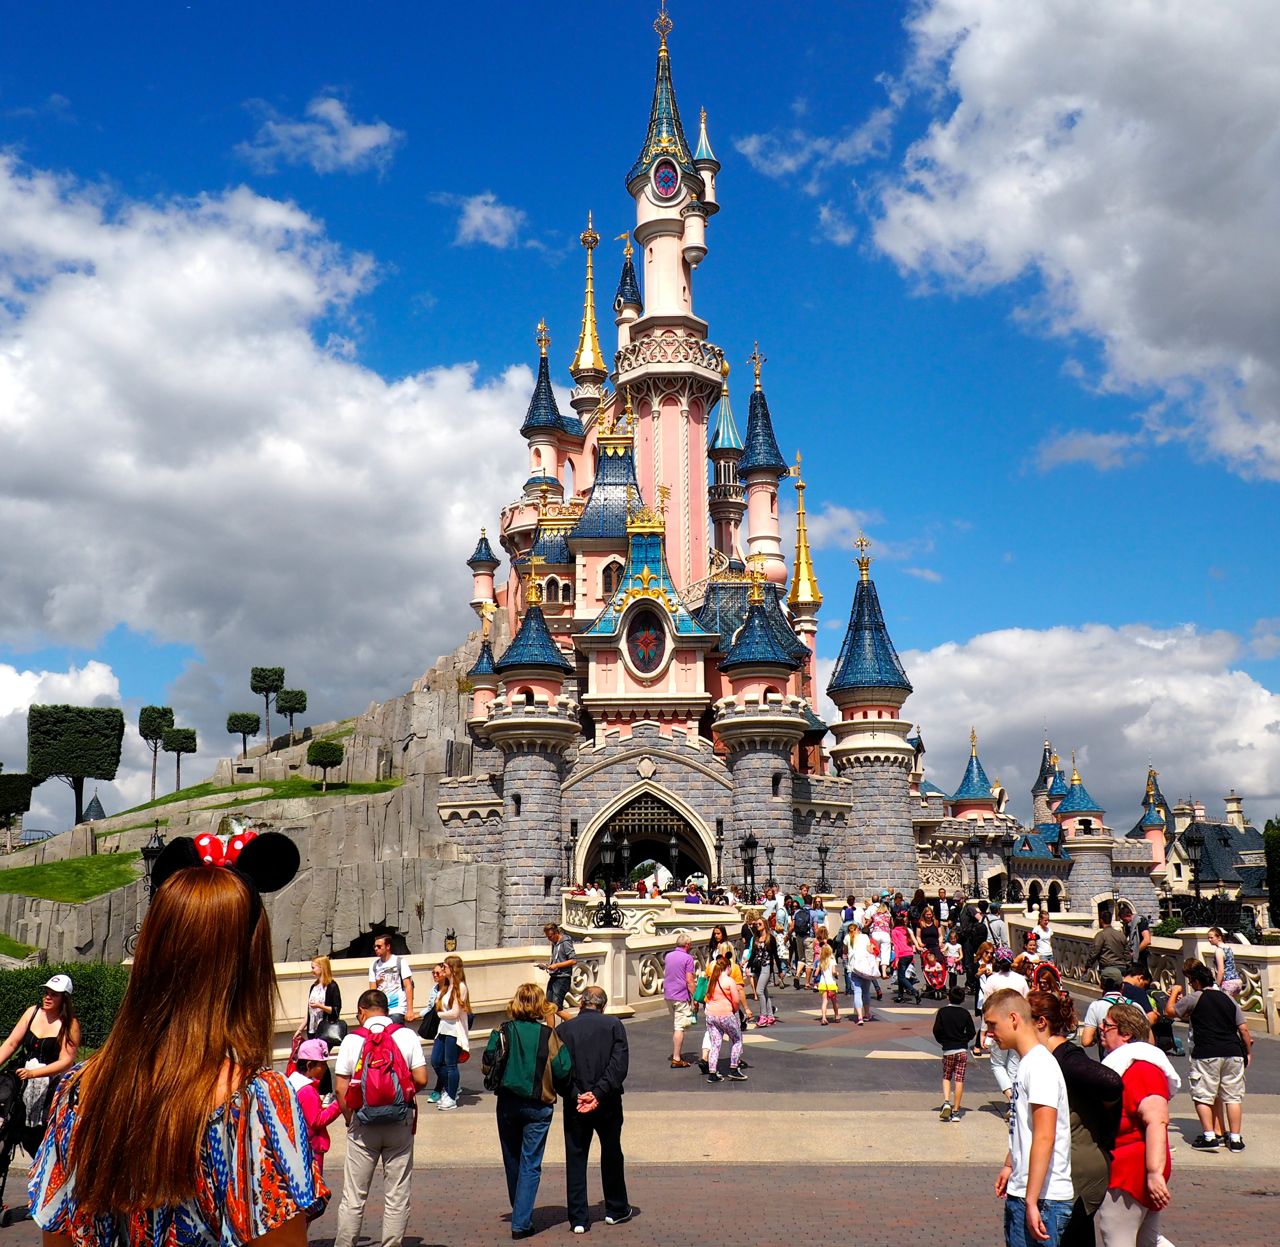 Your visit to Disneyland should be magical and a day to remember. Here